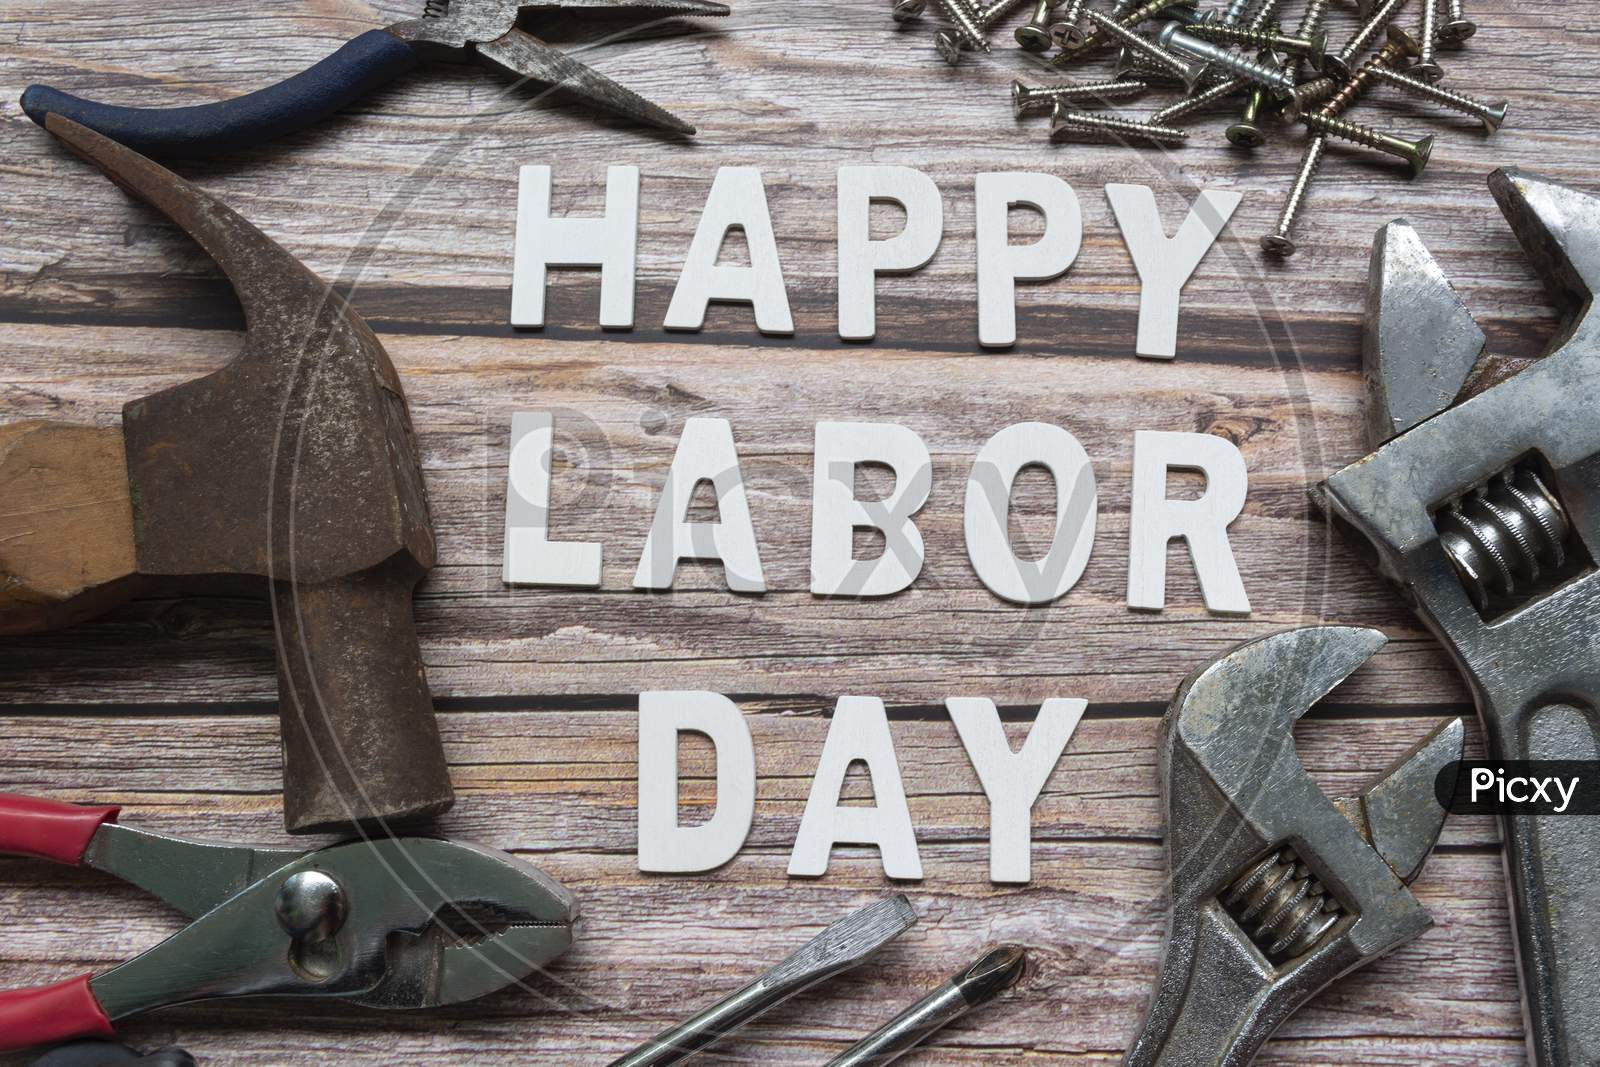 Happy Labor Day Text With Many Handy Tools On Wooden Background